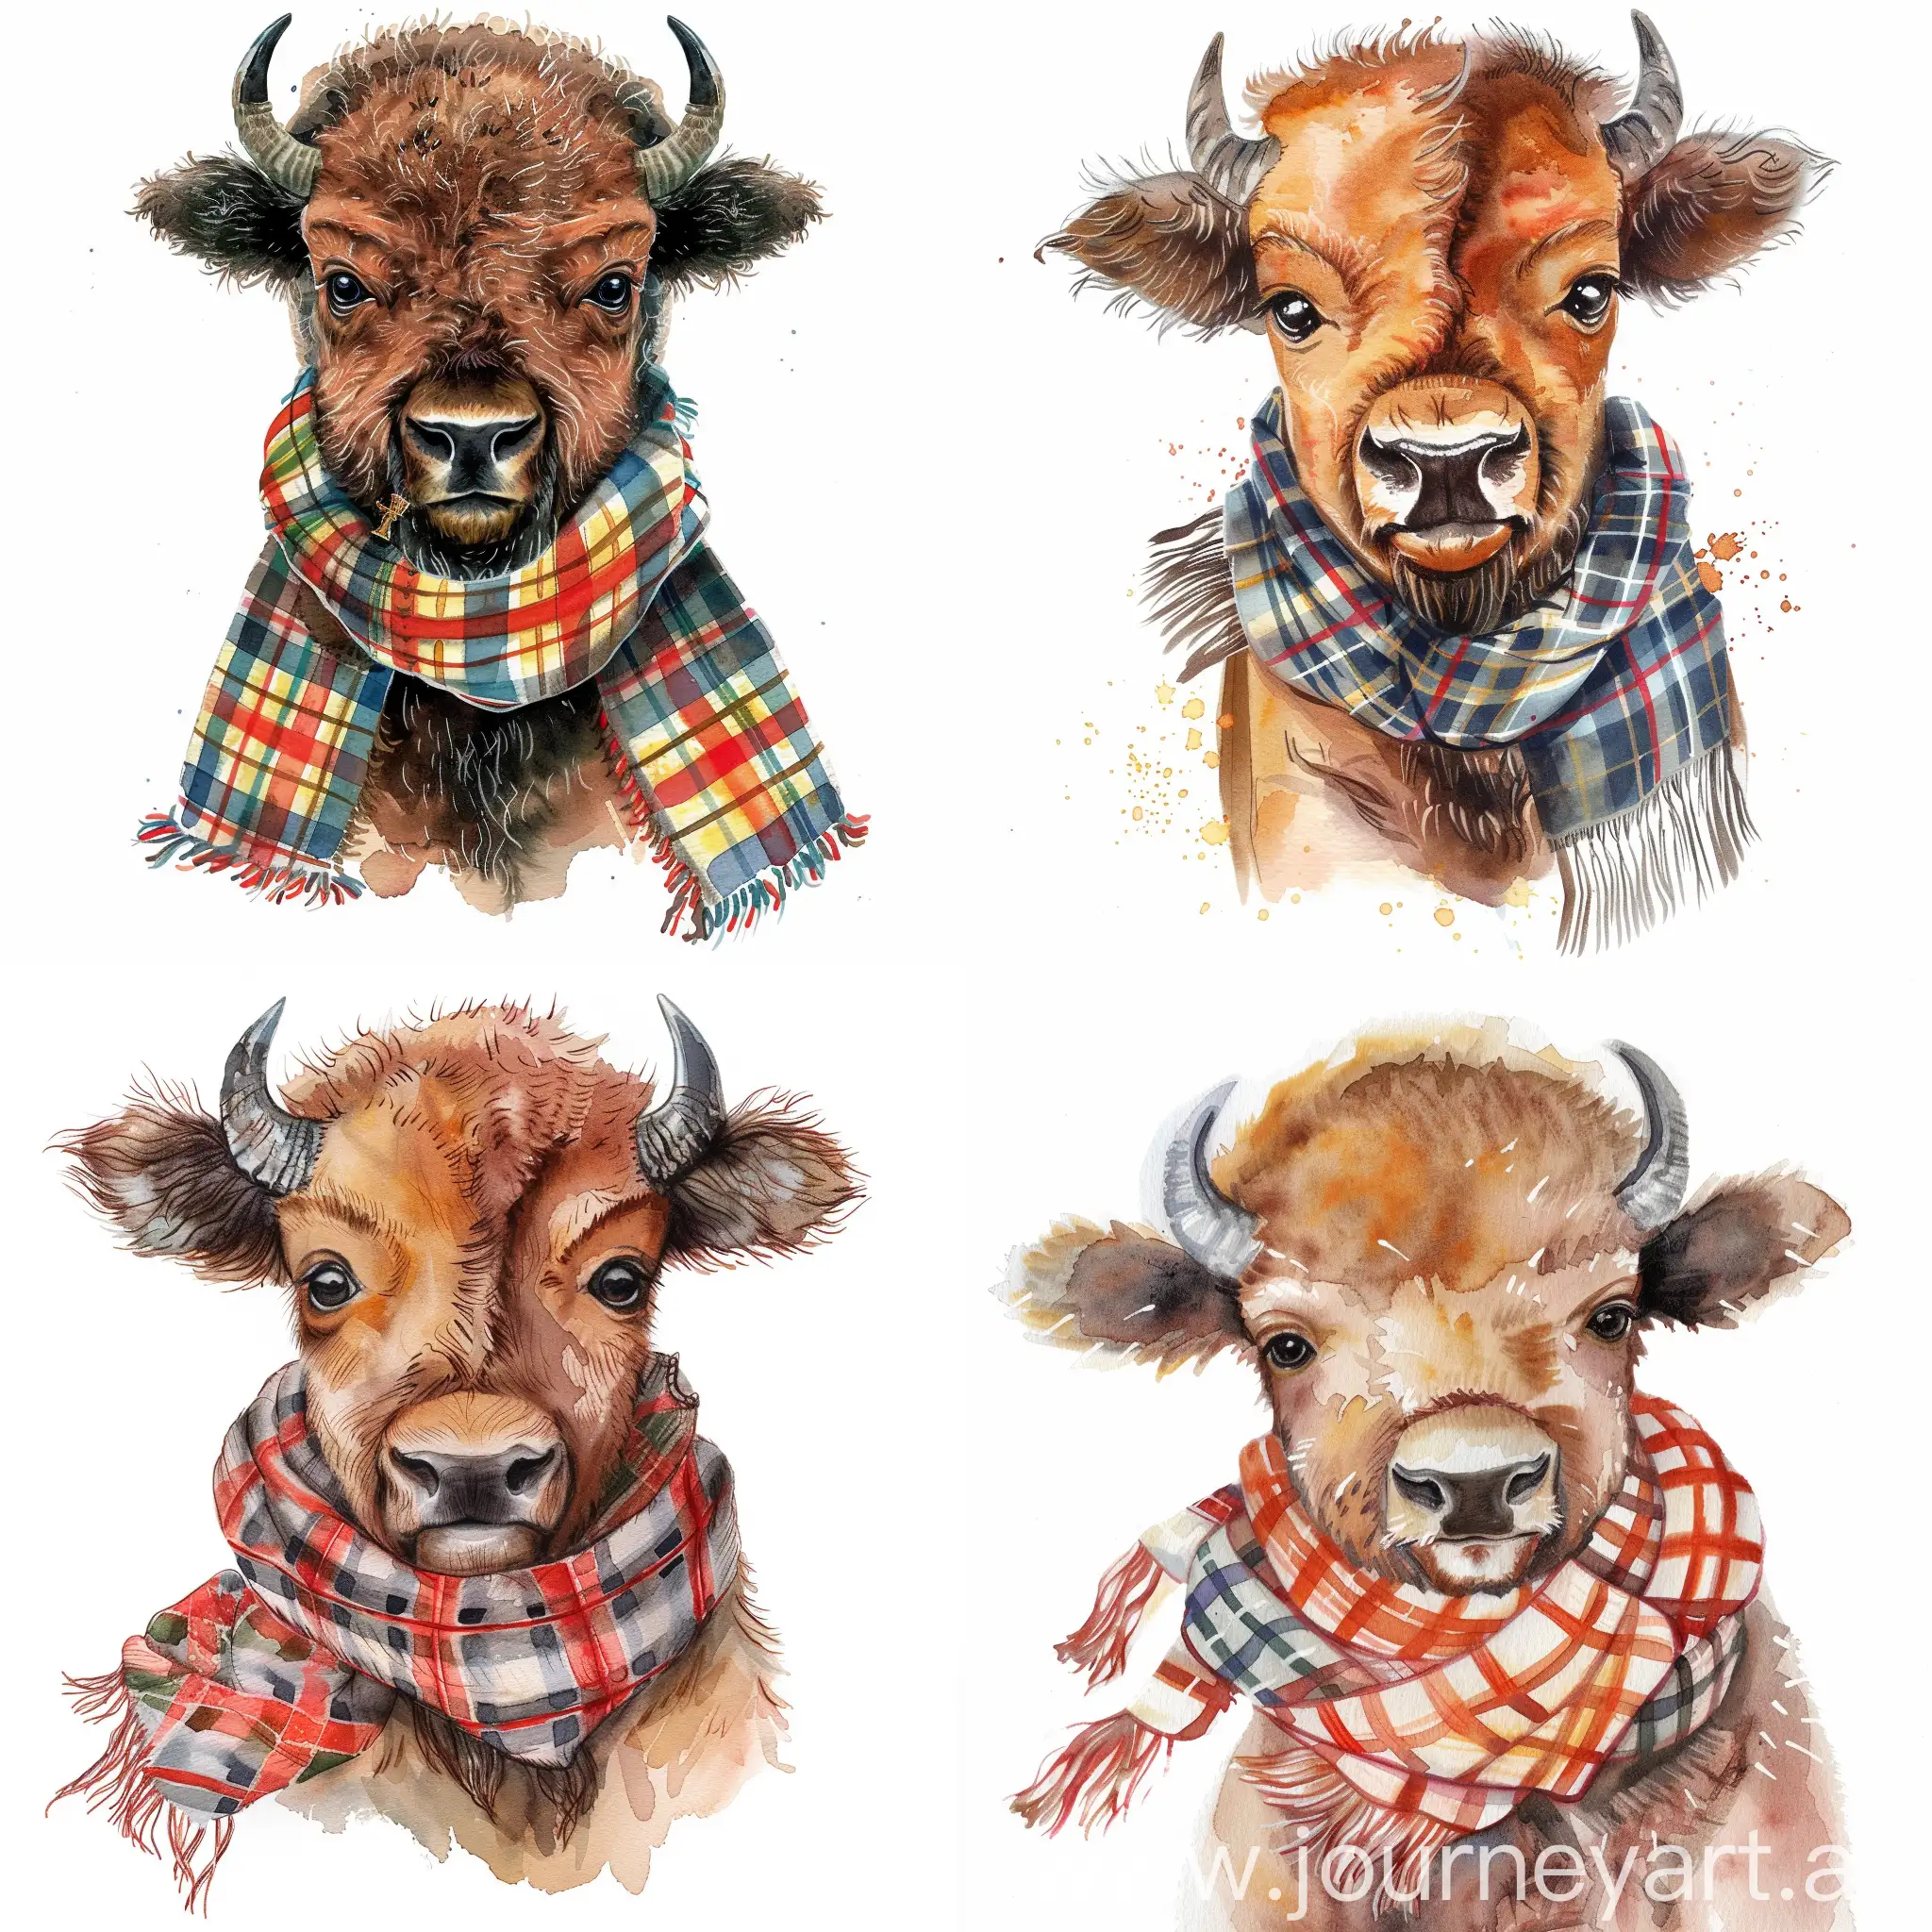 portrait baby bison wearing scarf with Scotland pattern around his neck, in high quality watercolor style